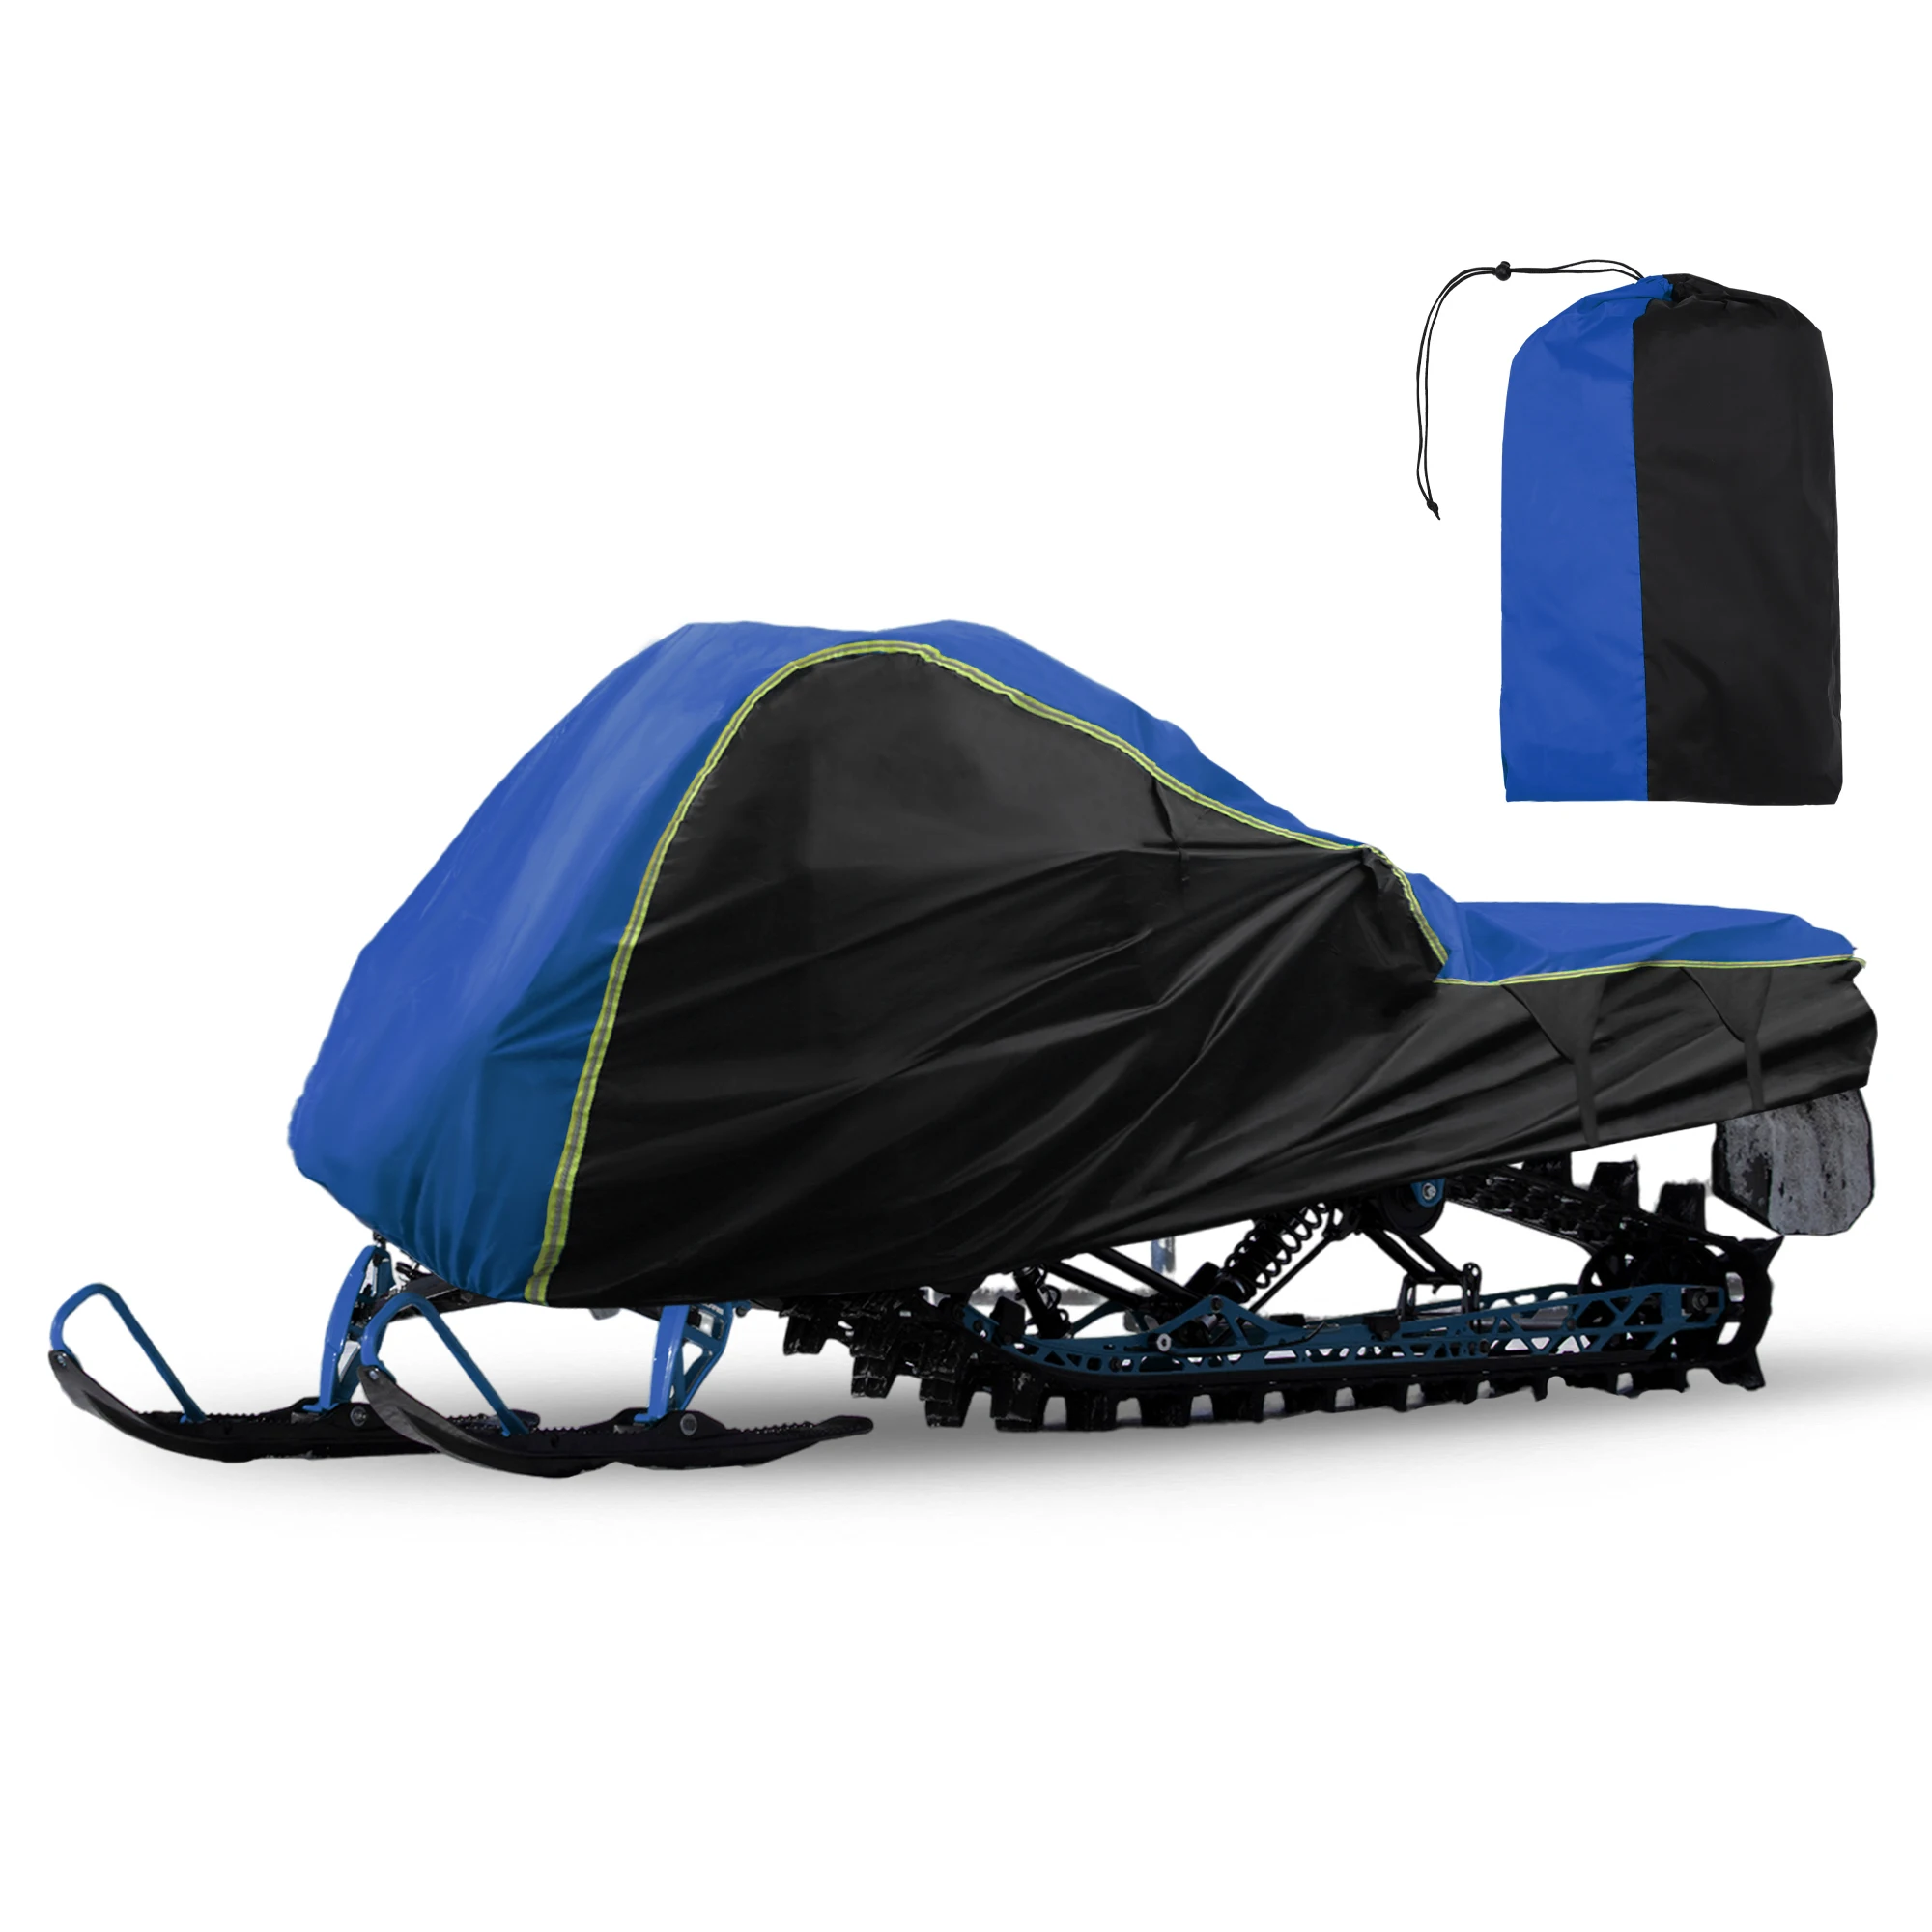 uxcell-290x130x122cm-snowmobile-cover-indoor-outdoor-waterproof-trailerable-snowsled-cover-snowshield-ski-cover-black-blue